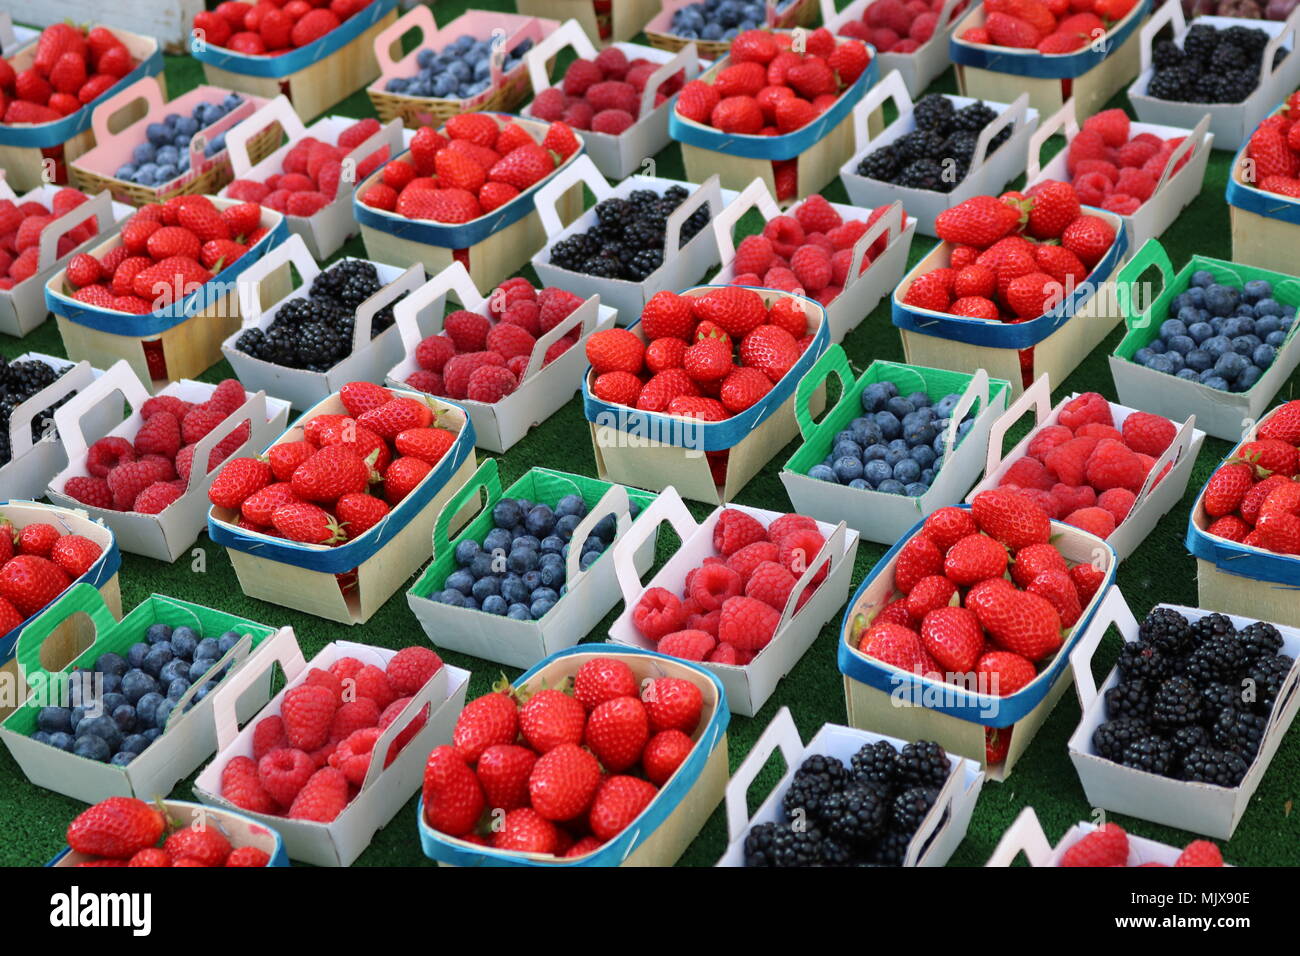 Display of Neat rows of Mini identical boxes of summer fruit - raspberries, blueberries, blackberries and strawberries Stock Photo